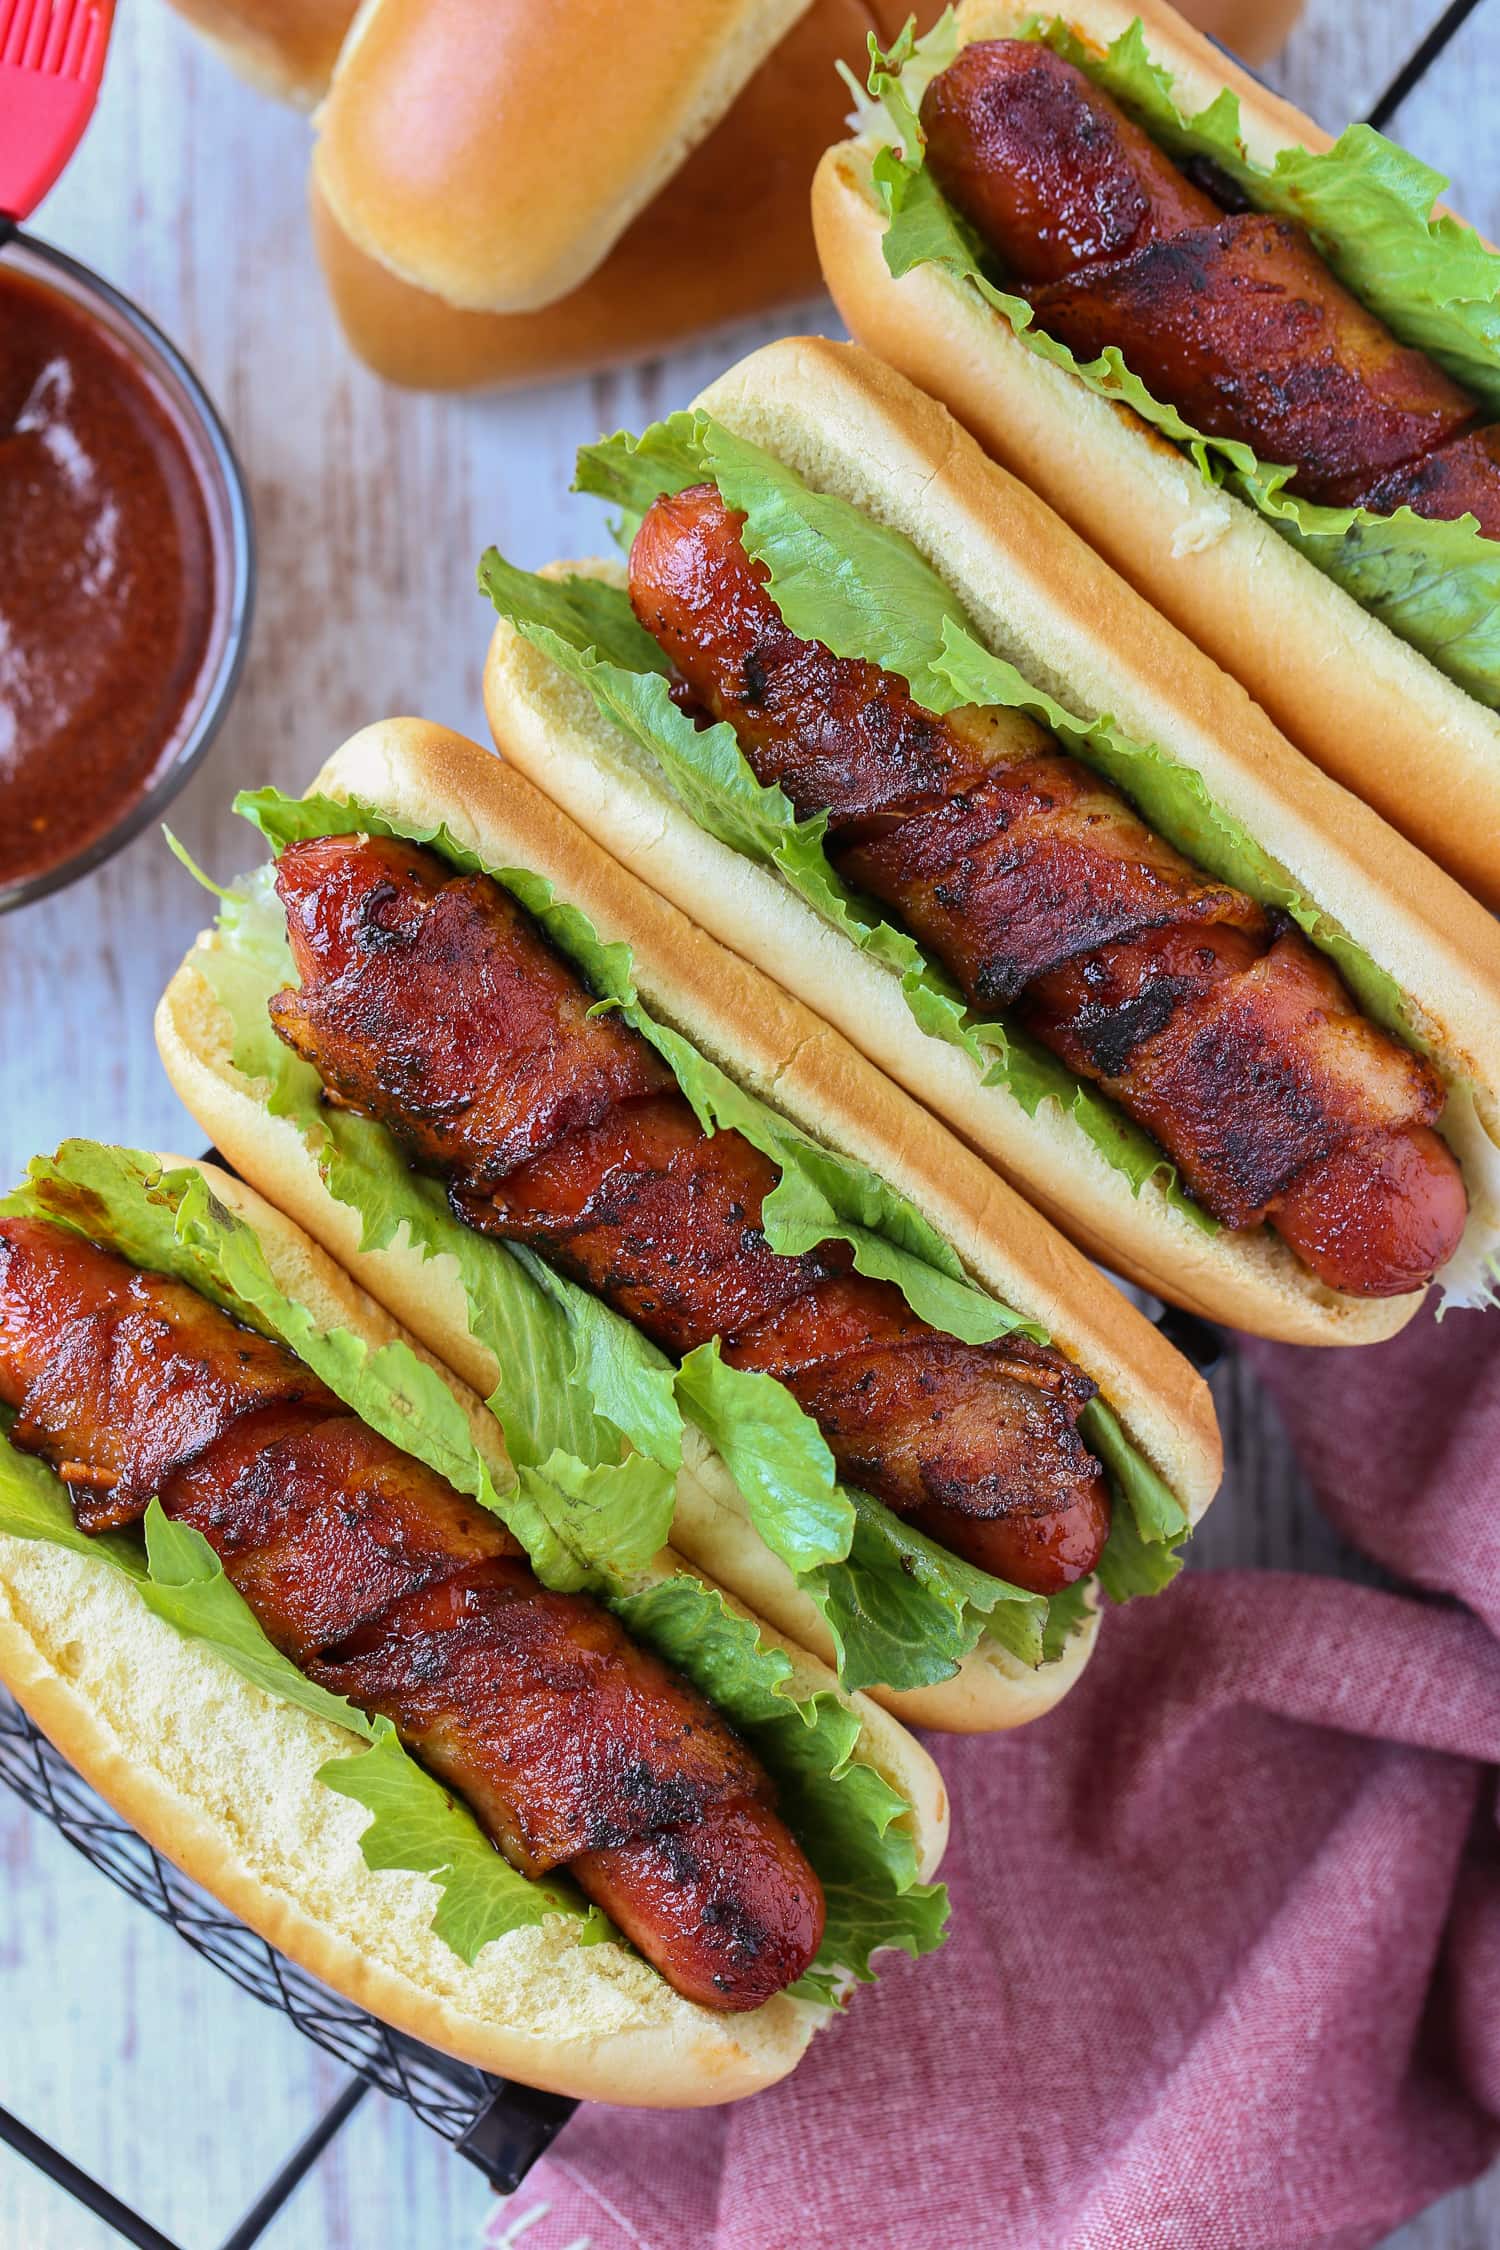 bacon wrapped hot dogs on buns with lettuce